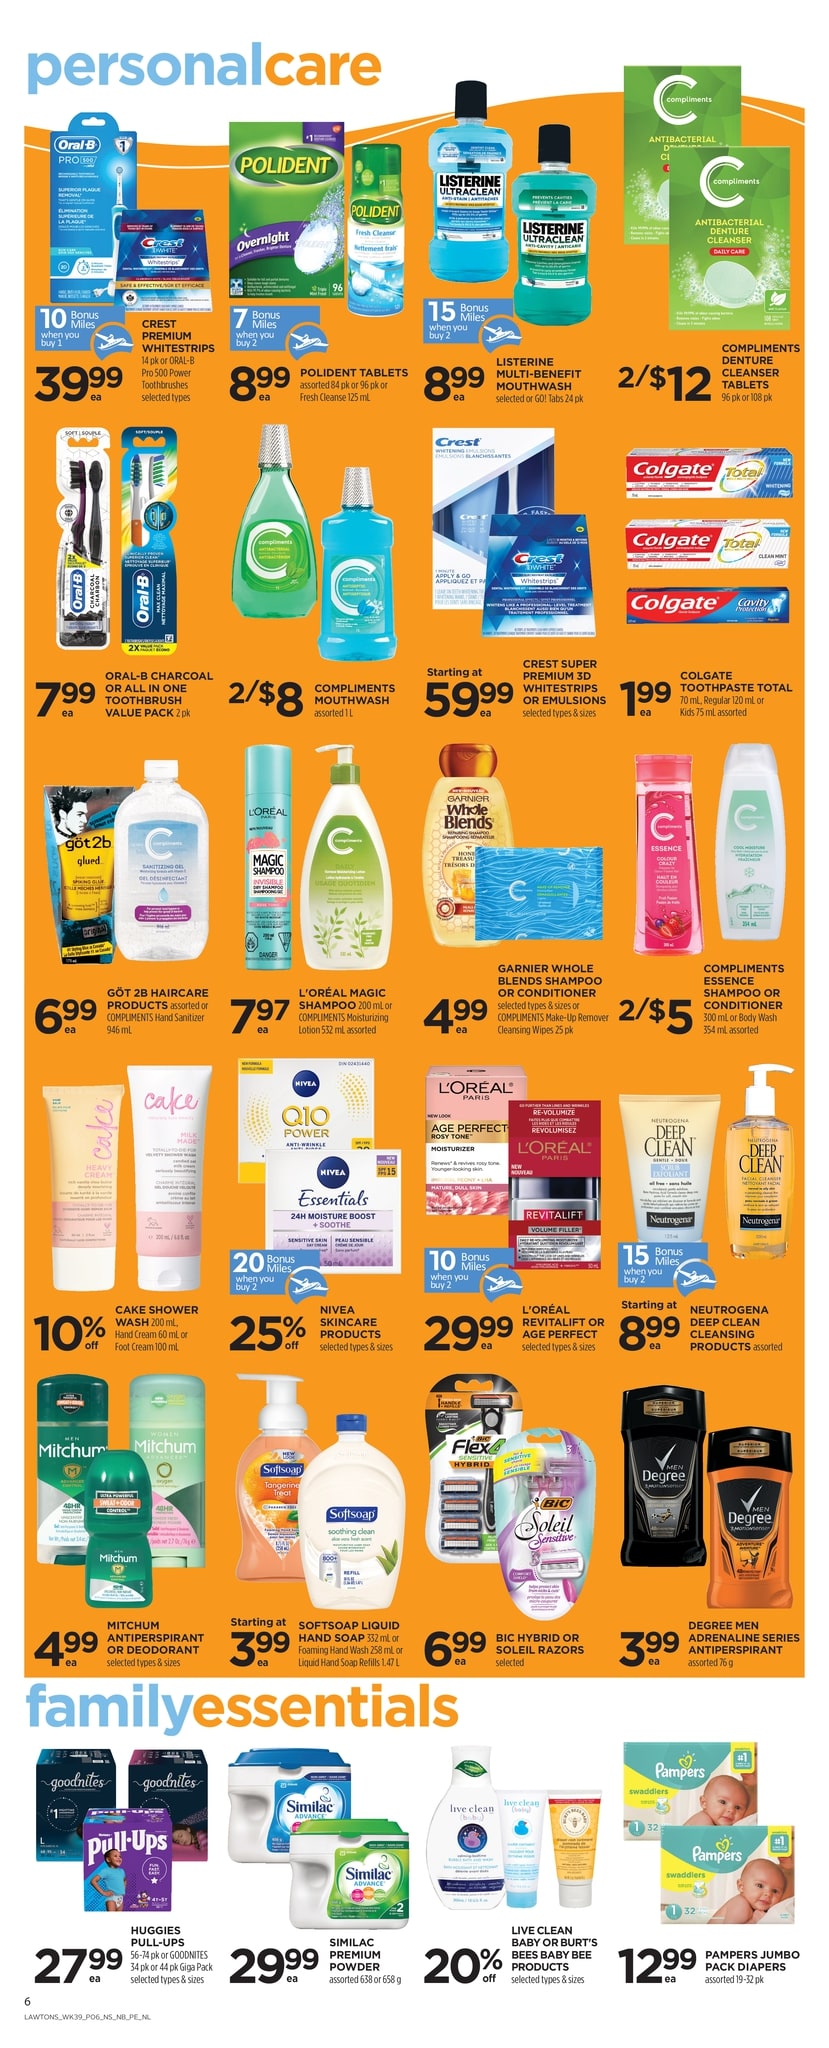 Lawtons Drugs - Weekly Flyer Specials - Page 5